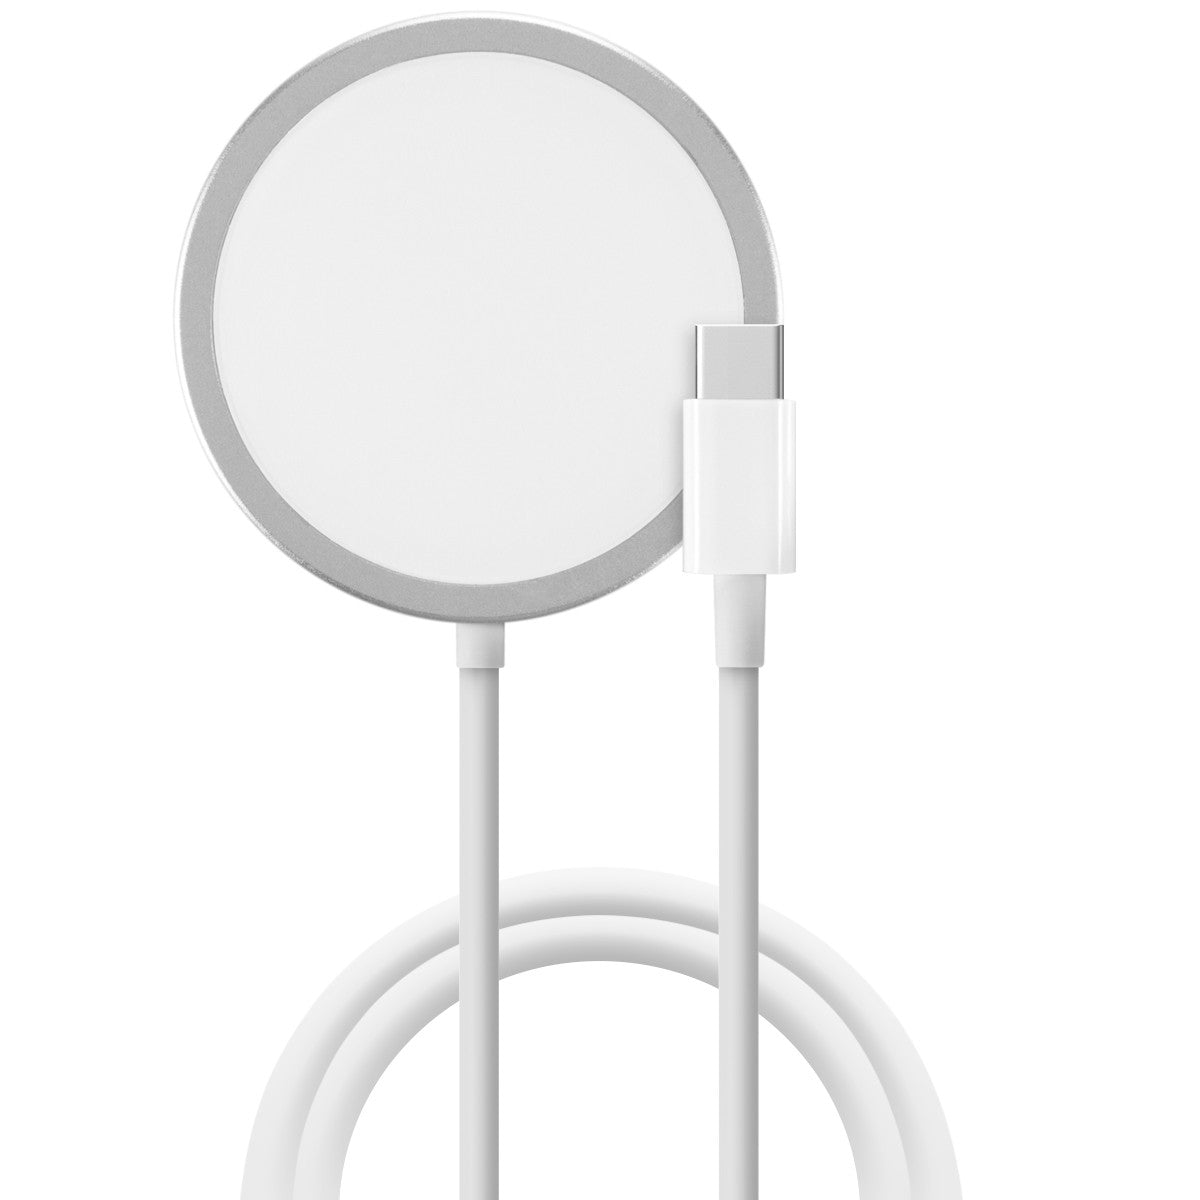 Apple MagSafe Charger - Micro Center